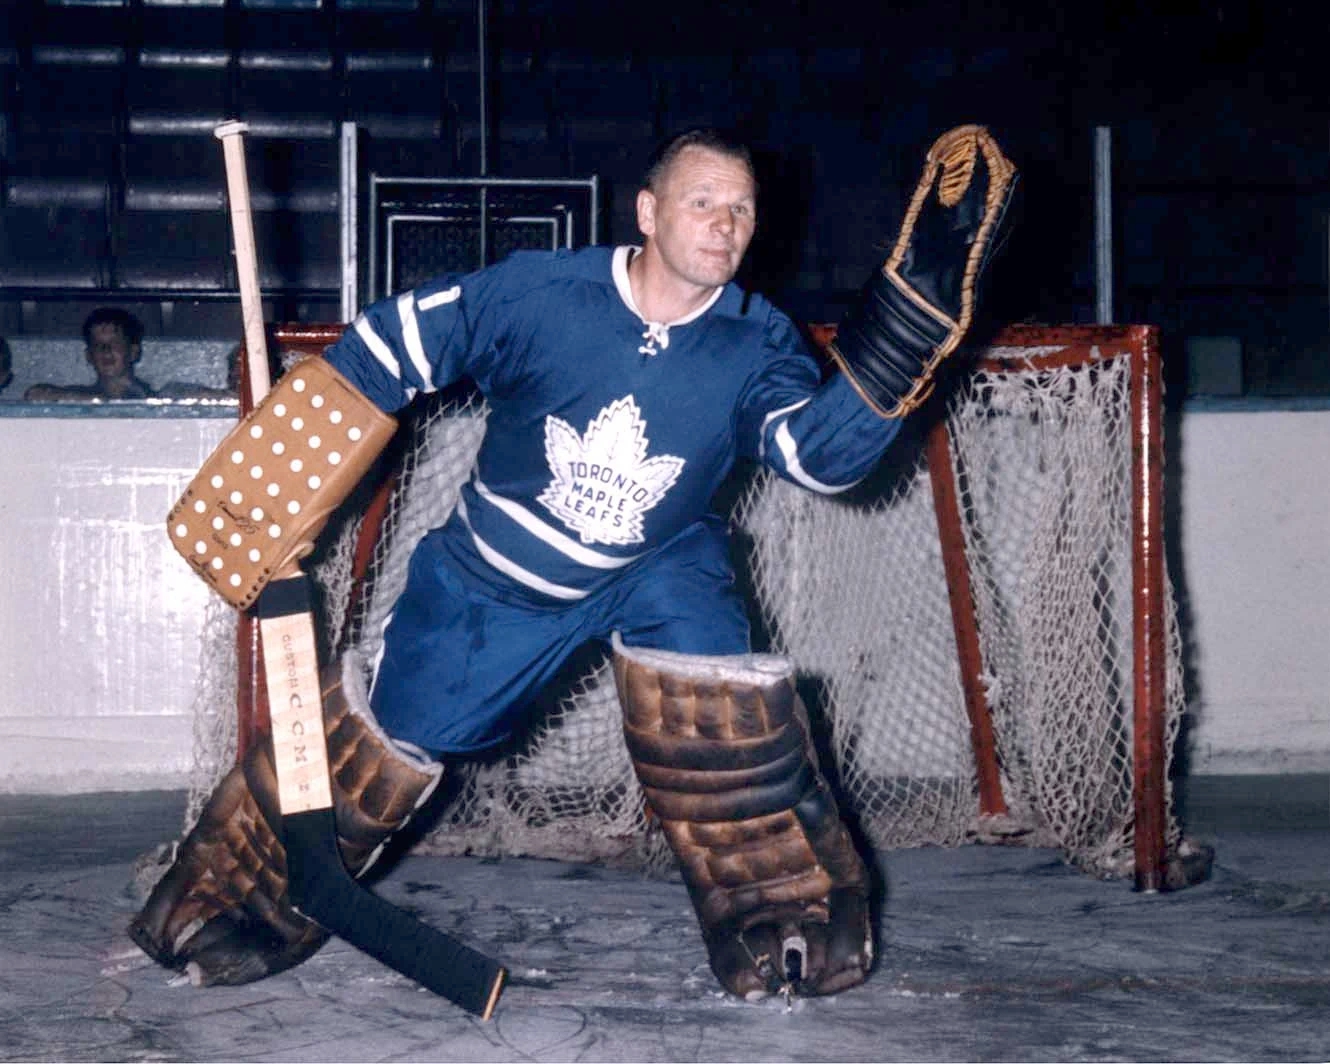 This Day In Hockey History-April 24, 1967-Face Mask For Bower Next Year